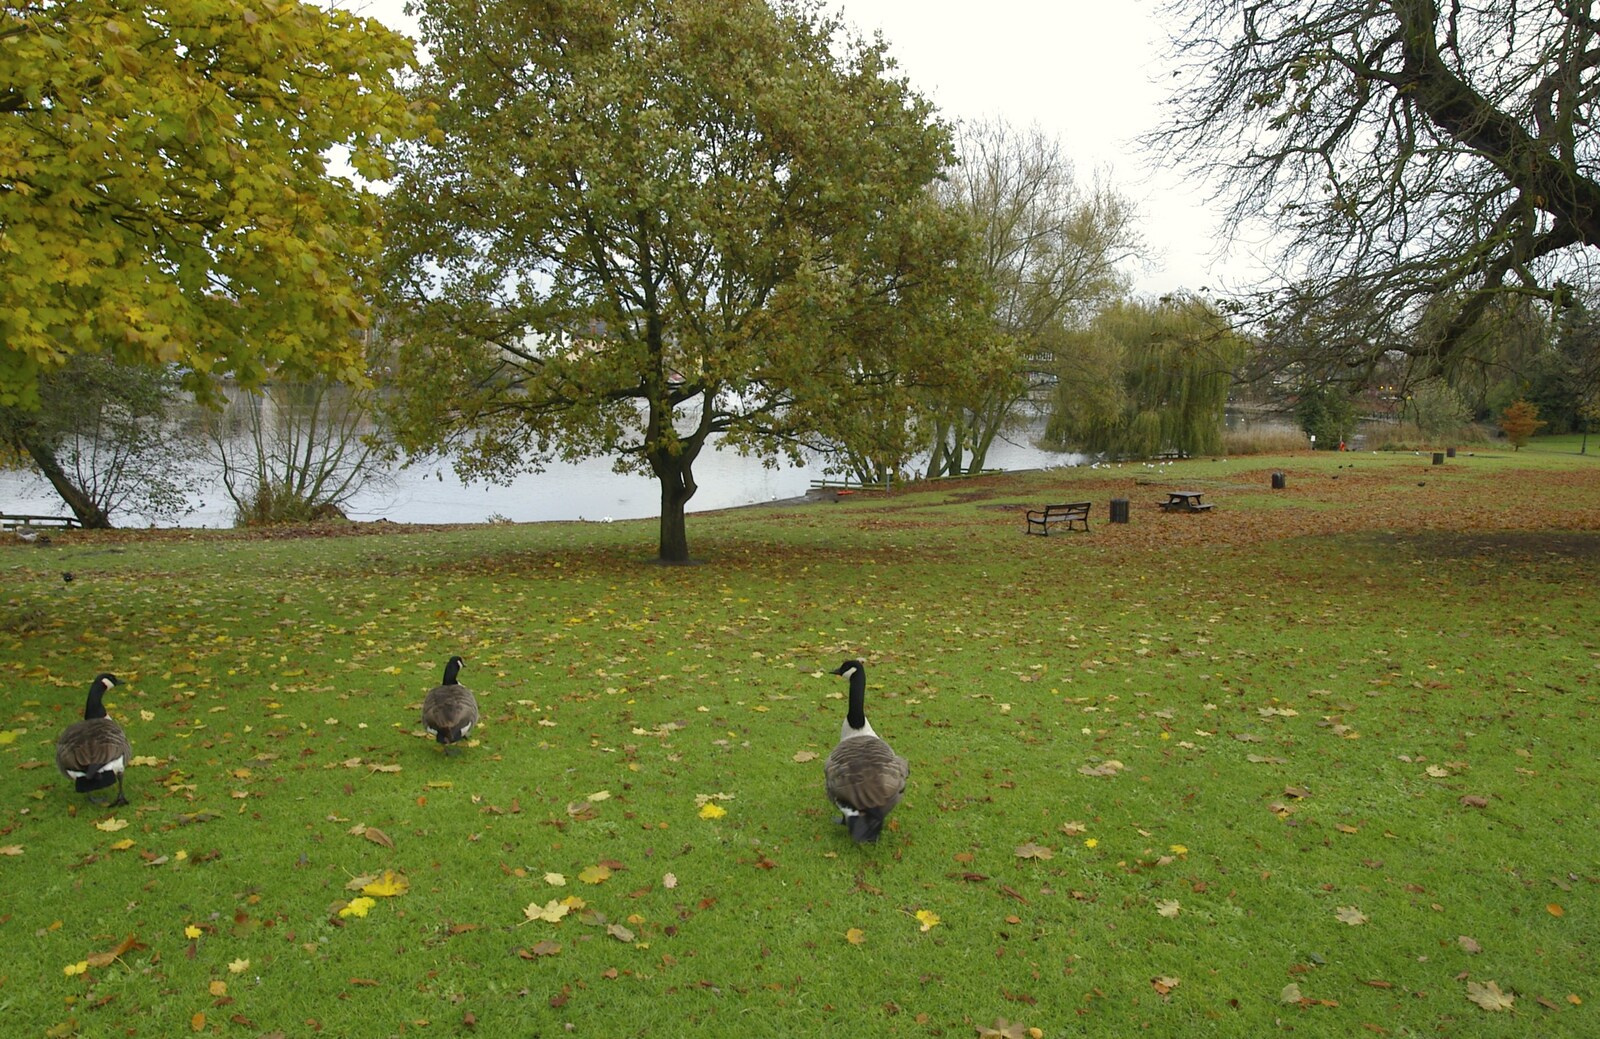 Some geese roam around looking for trouble from Post-modern Alienation: Bleak House, a Diss Miscellany, Norfolk - 3rd December 2005